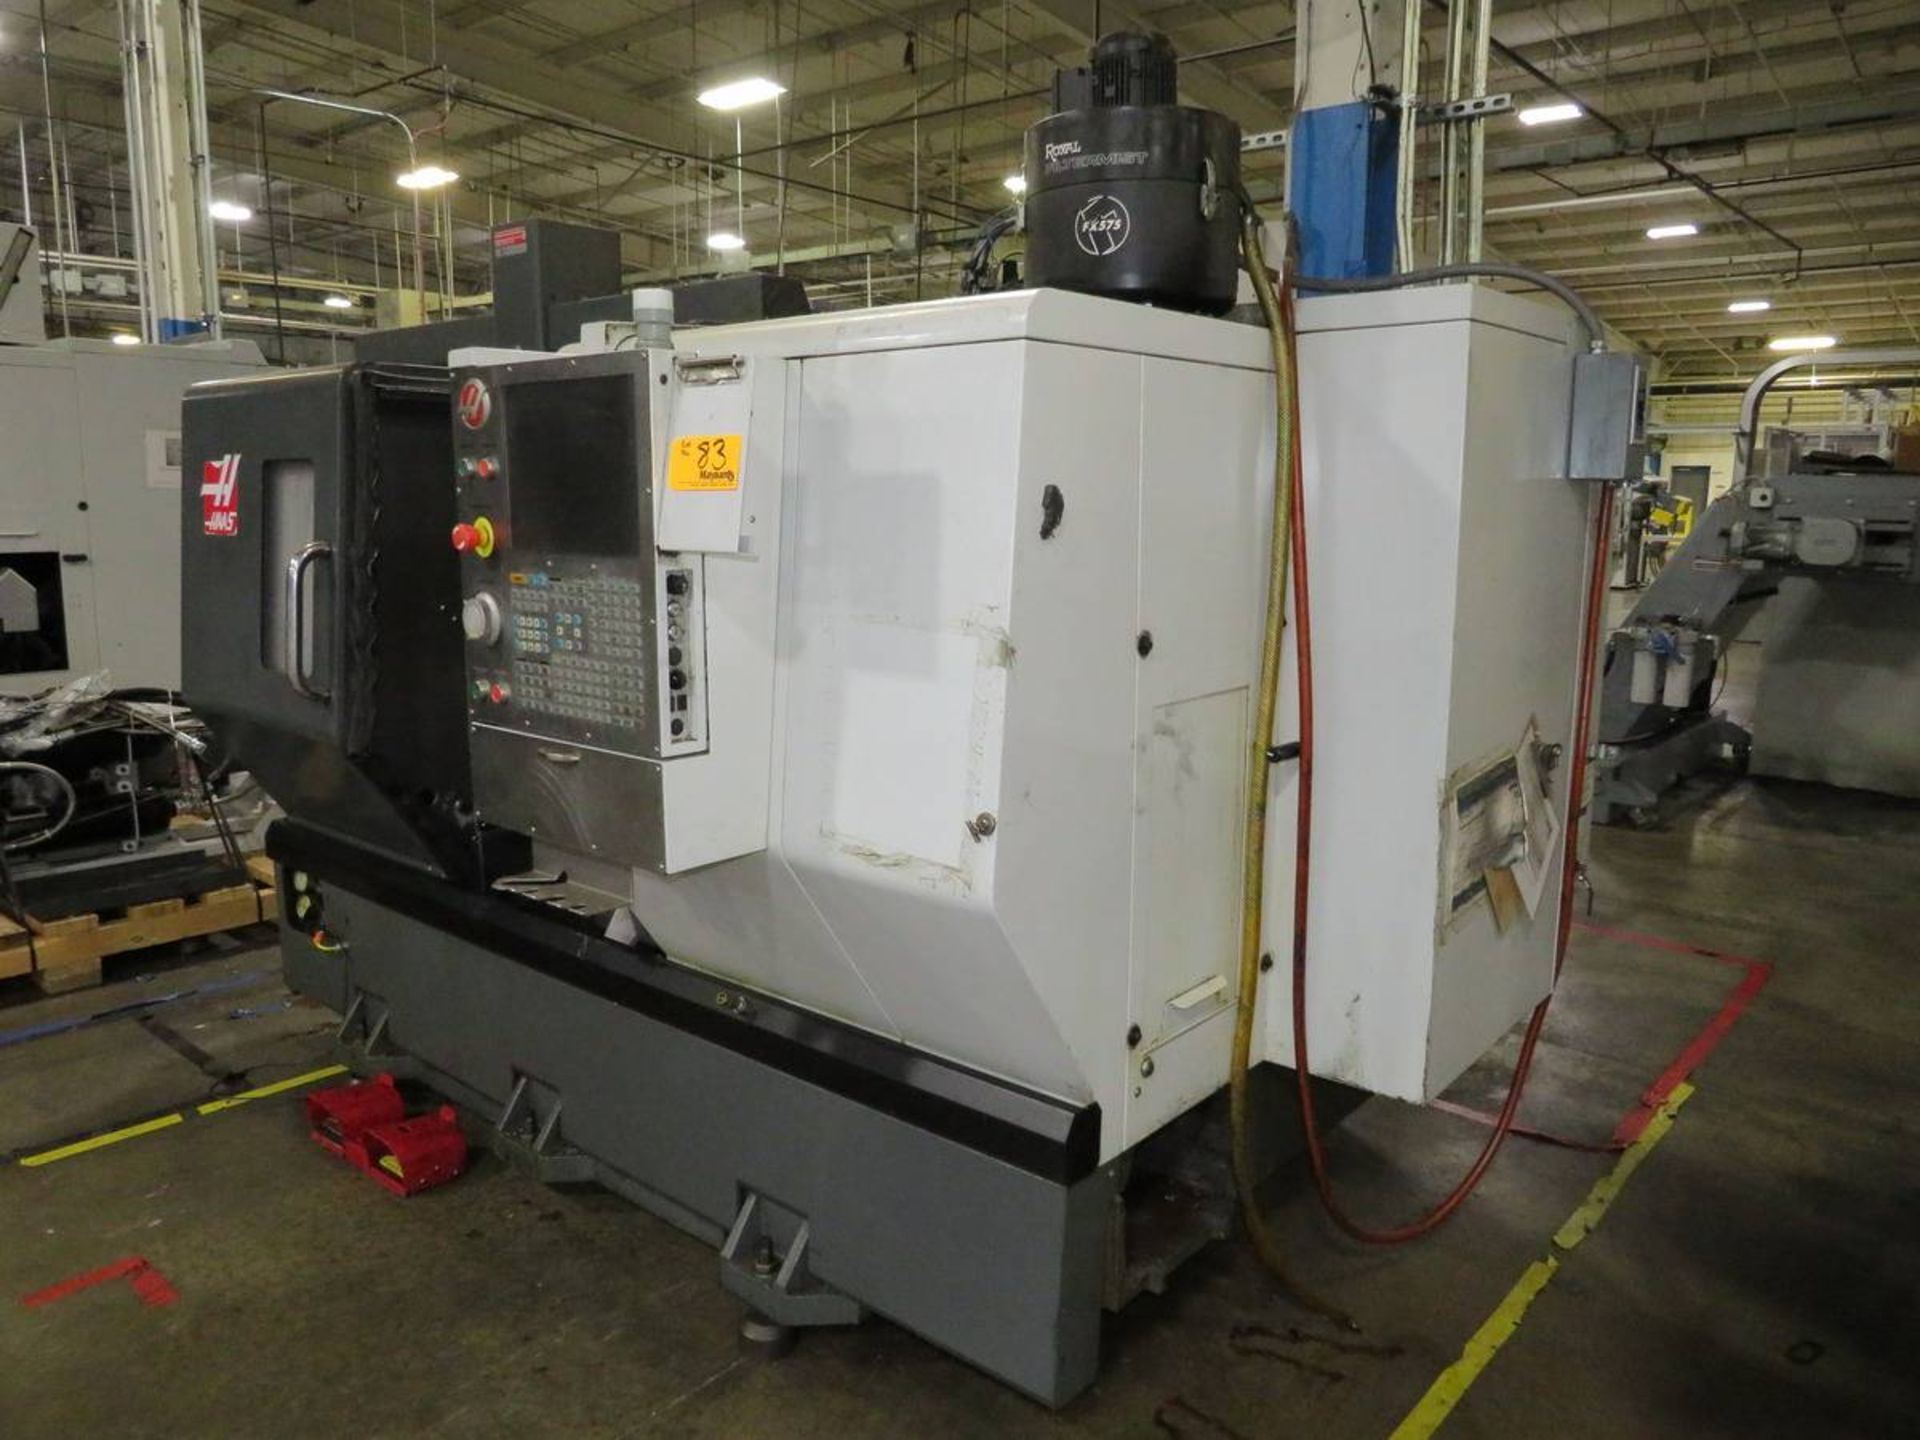 2012 Haas ST-20 CNC Turning Center - Image 4 of 10